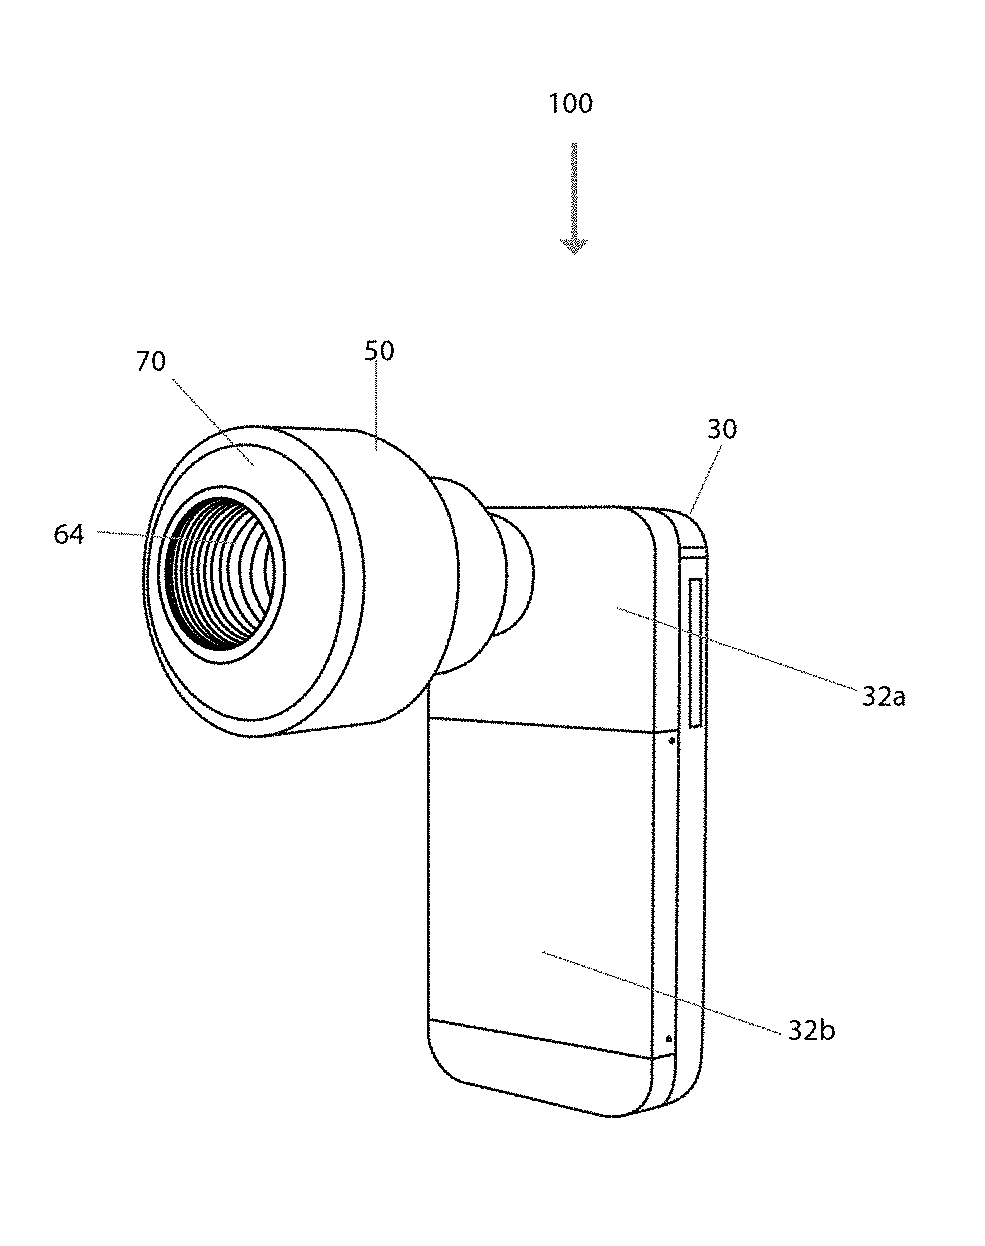 System and method for ophthalmological imaging adapted to a mobile processing device